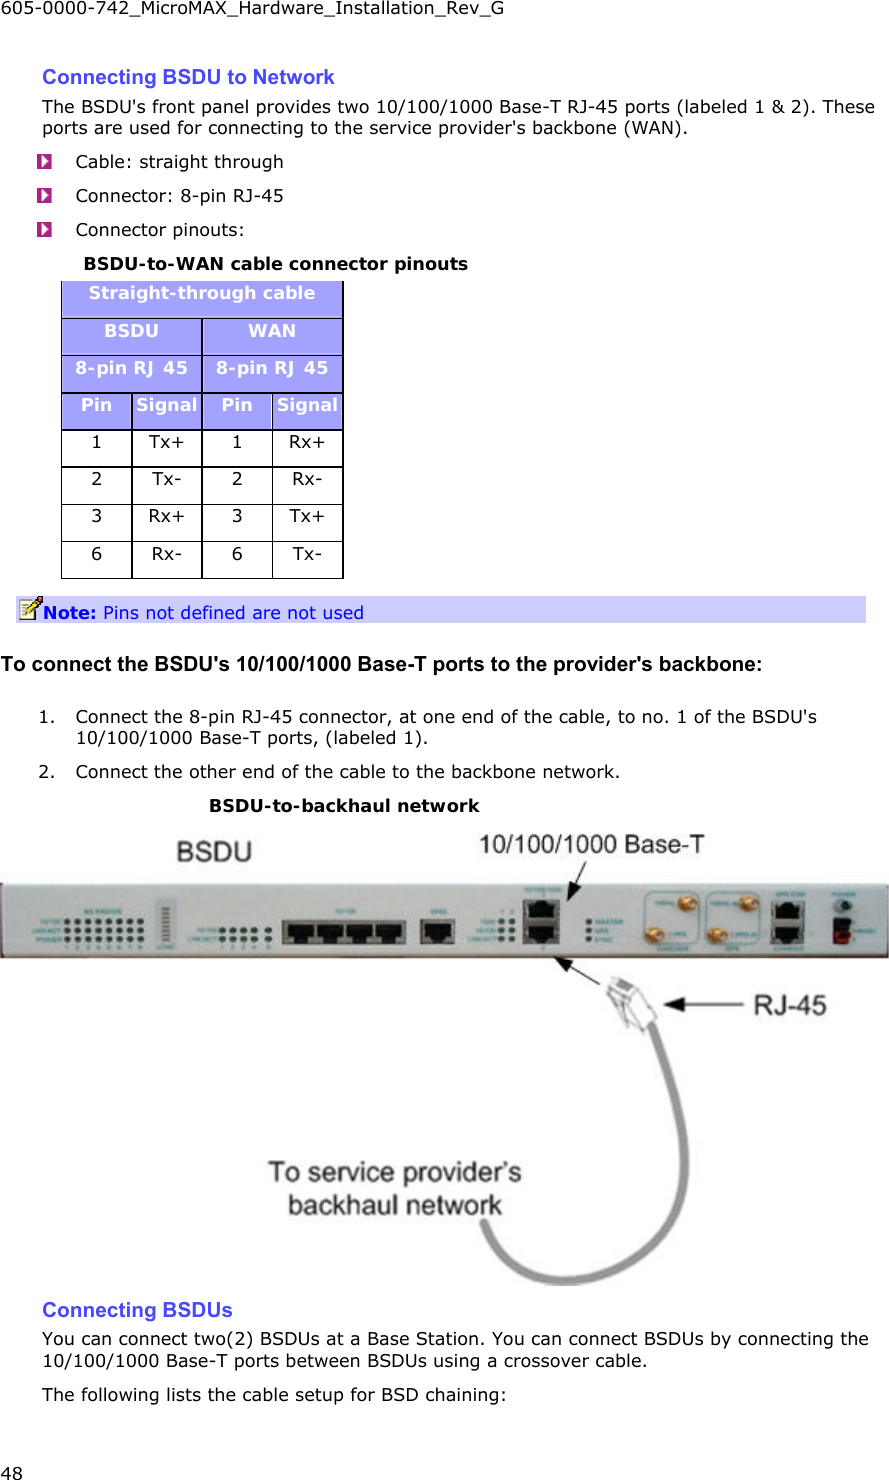 605-0000-742_MicroMAX_Hardware_Installation_Rev_G 48   Connecting BSDU to Network The BSDU&apos;s front panel provides two 10/100/1000 Base-T RJ-45 ports (labeled 1 &amp; 2). These ports are used for connecting to the service provider&apos;s backbone (WAN).  Cable: straight through  Connector: 8-pin RJ-45  Connector pinouts: BSDU-to-WAN cable connector pinouts Straight-through cable BSDU  WAN 8-pin RJ 45  8-pin RJ 45 Pin  Signal Pin  Signal 1 Tx+ 1 Rx+ 2 Tx- 2 Rx- 3 Rx+ 3 Tx+ 6 Rx- 6 Tx- Note: Pins not defined are not used To connect the BSDU&apos;s 10/100/1000 Base-T ports to the provider&apos;s backbone: 1. Connect the 8-pin RJ-45 connector, at one end of the cable, to no. 1 of the BSDU&apos;s 10/100/1000 Base-T ports, (labeled 1). 2. Connect the other end of the cable to the backbone network. BSDU-to-backhaul network  Connecting BSDUs You can connect two(2) BSDUs at a Base Station. You can connect BSDUs by connecting the 10/100/1000 Base-T ports between BSDUs using a crossover cable. The following lists the cable setup for BSD chaining: 